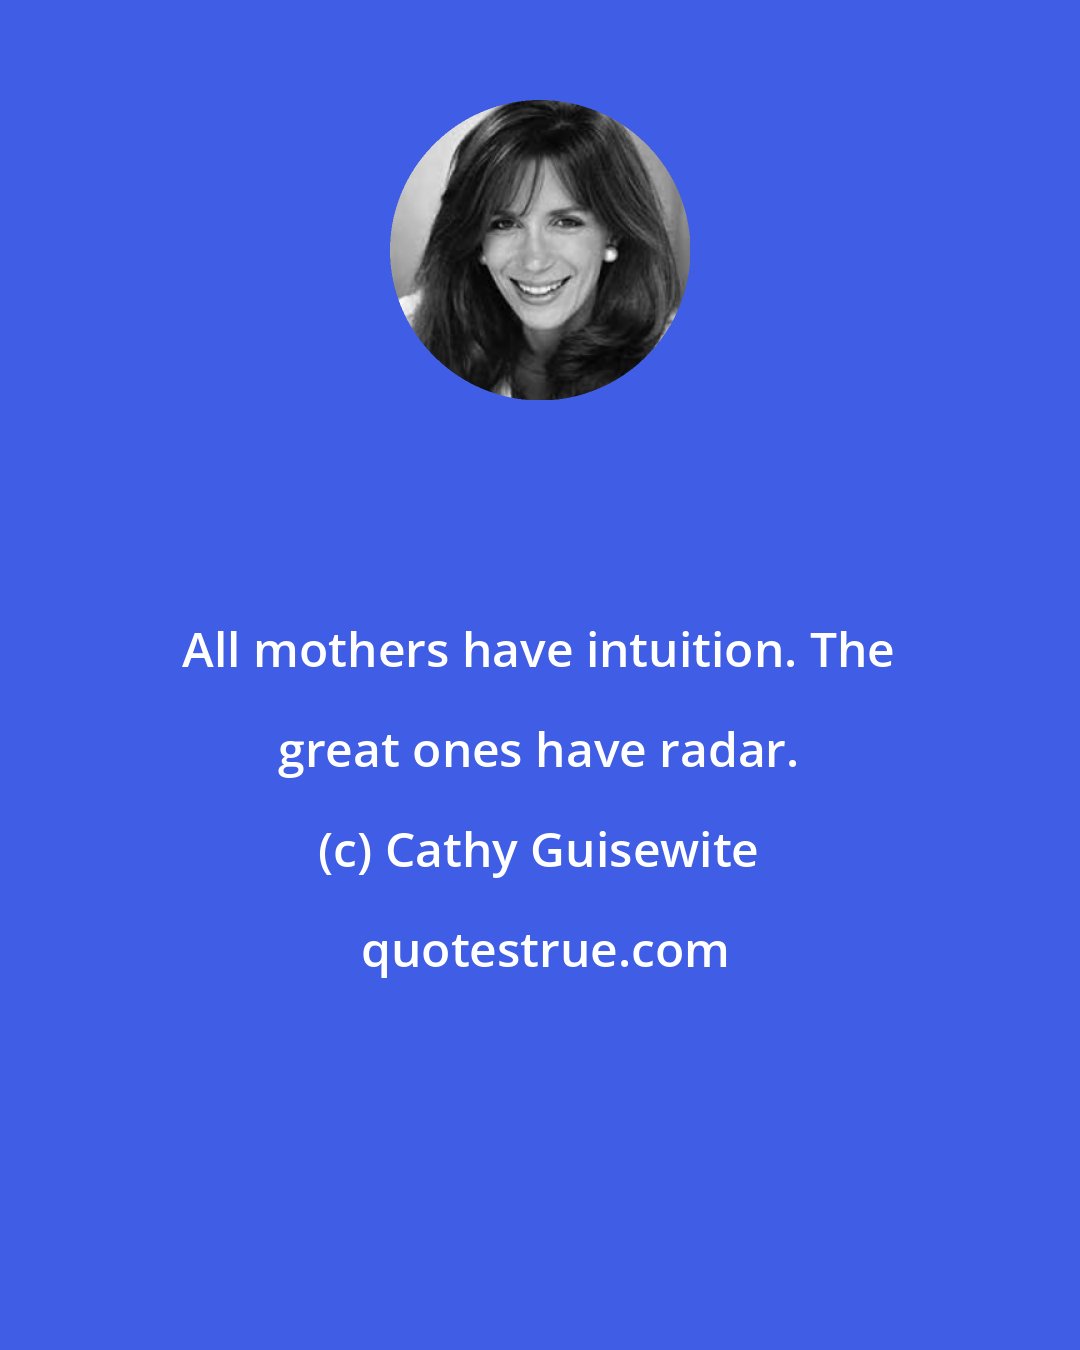 Cathy Guisewite: All mothers have intuition. The great ones have radar.